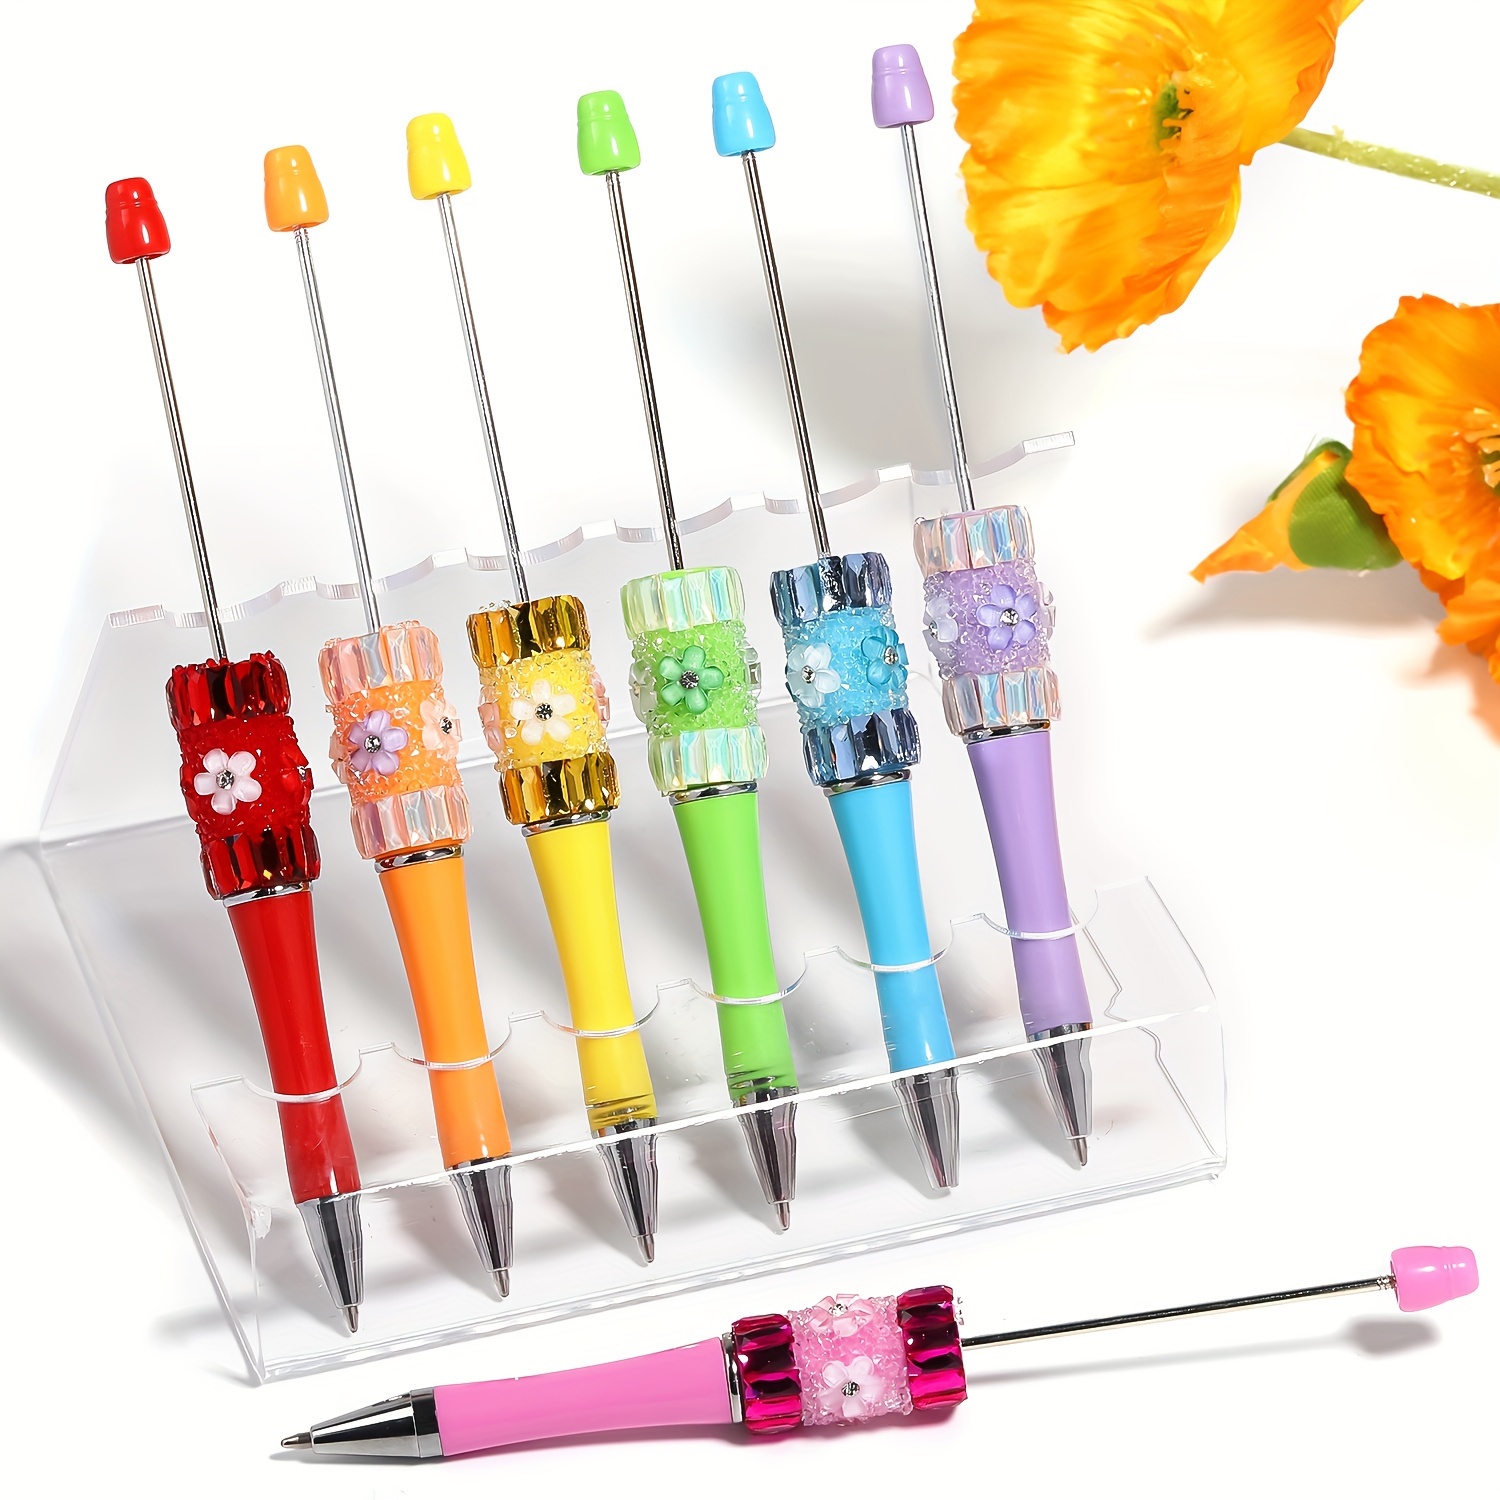 

8-piece Mixed Color Diy Beading Pen Set - Creative Acrylic Flower & Star Designs For Jewelry Making